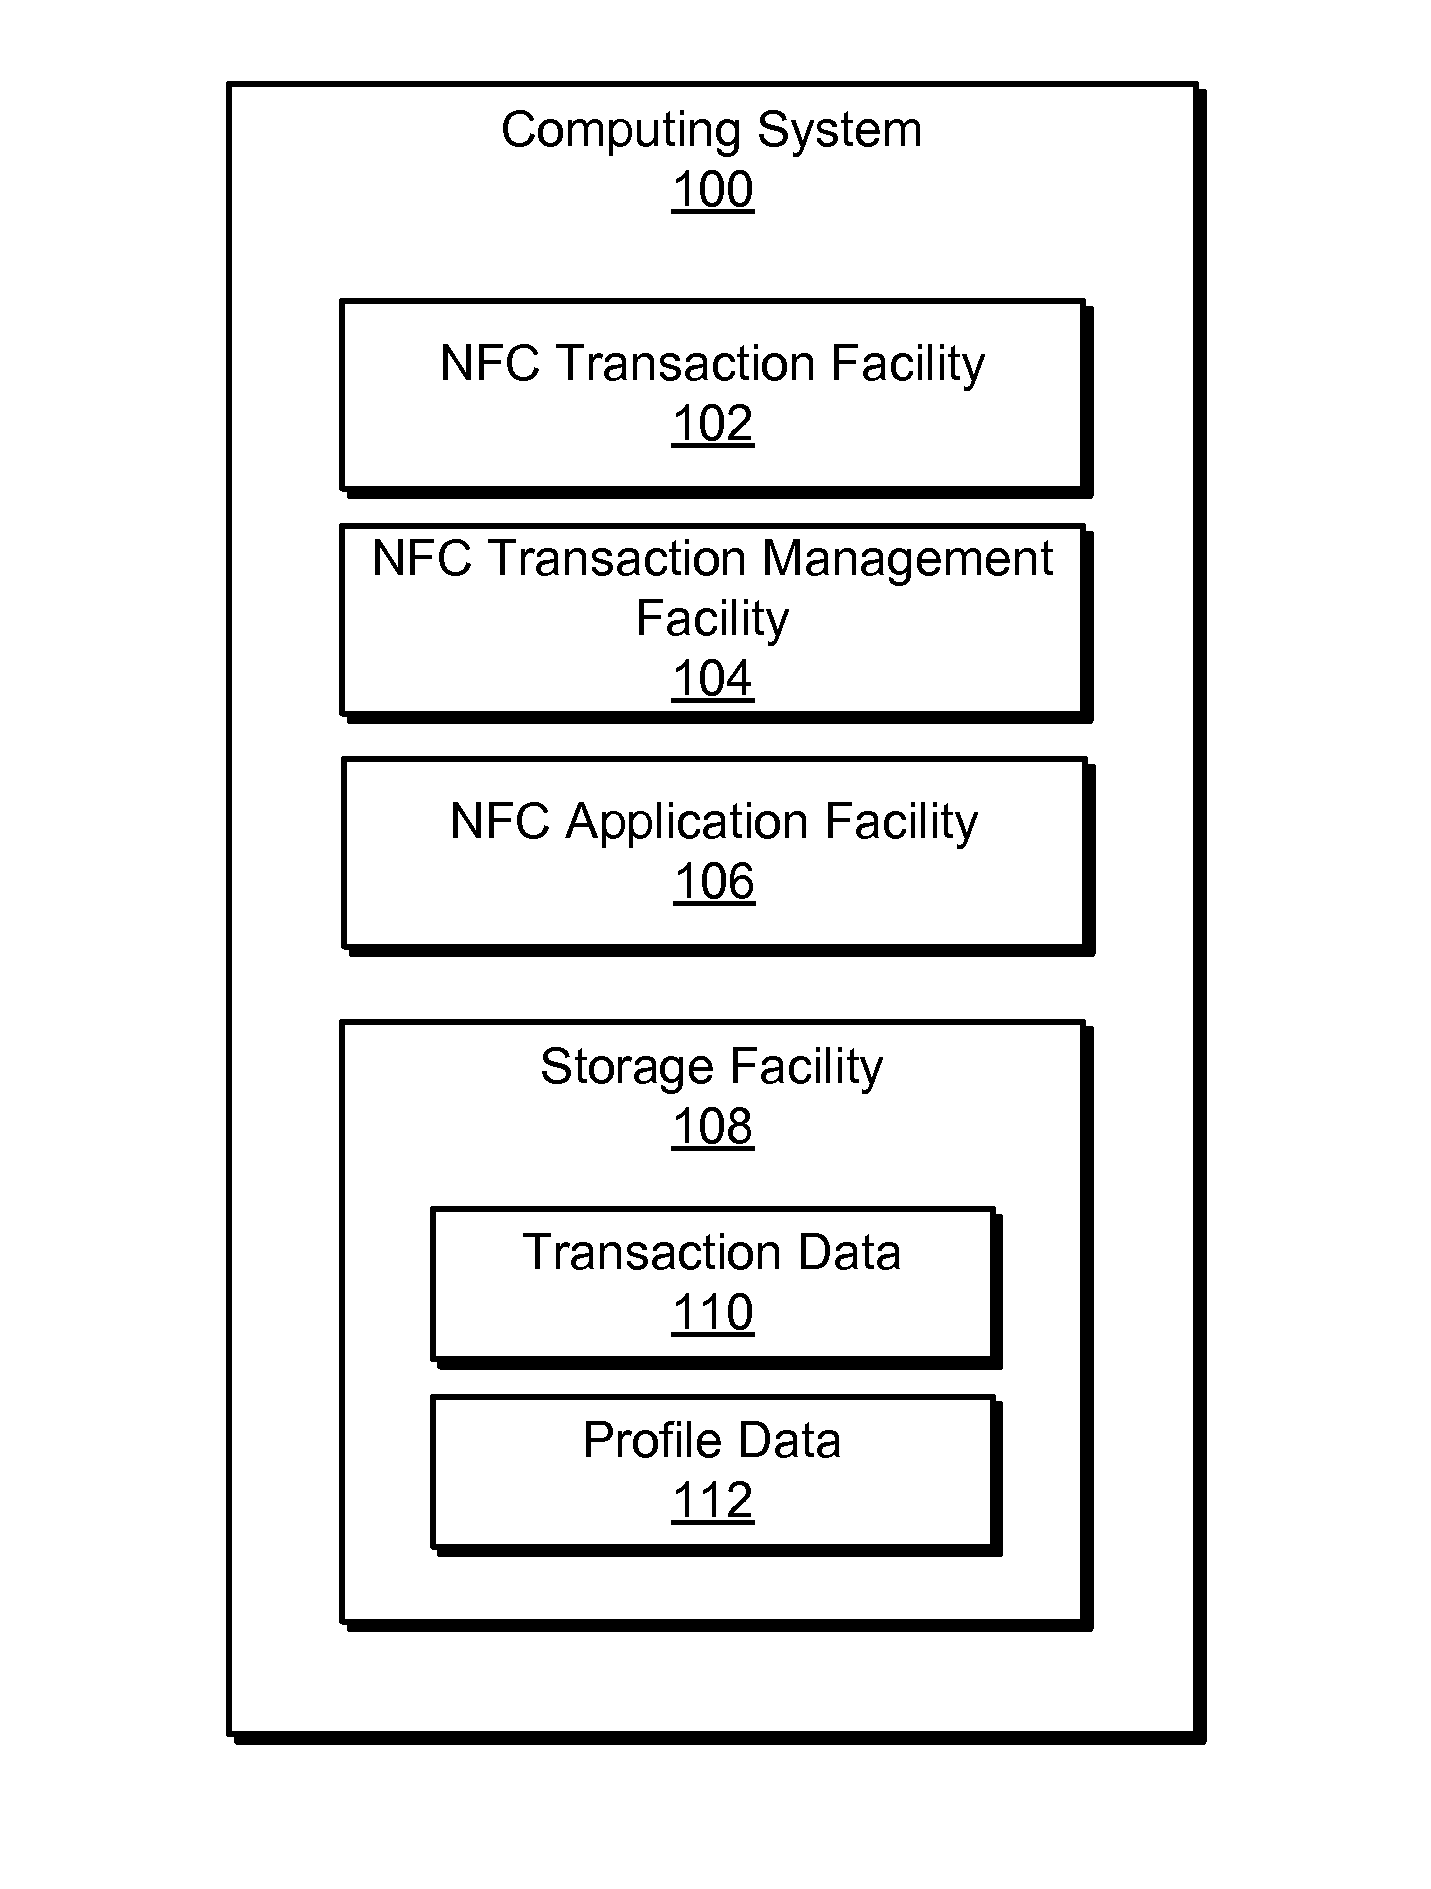 Near field communication transaction management and application systems and methods